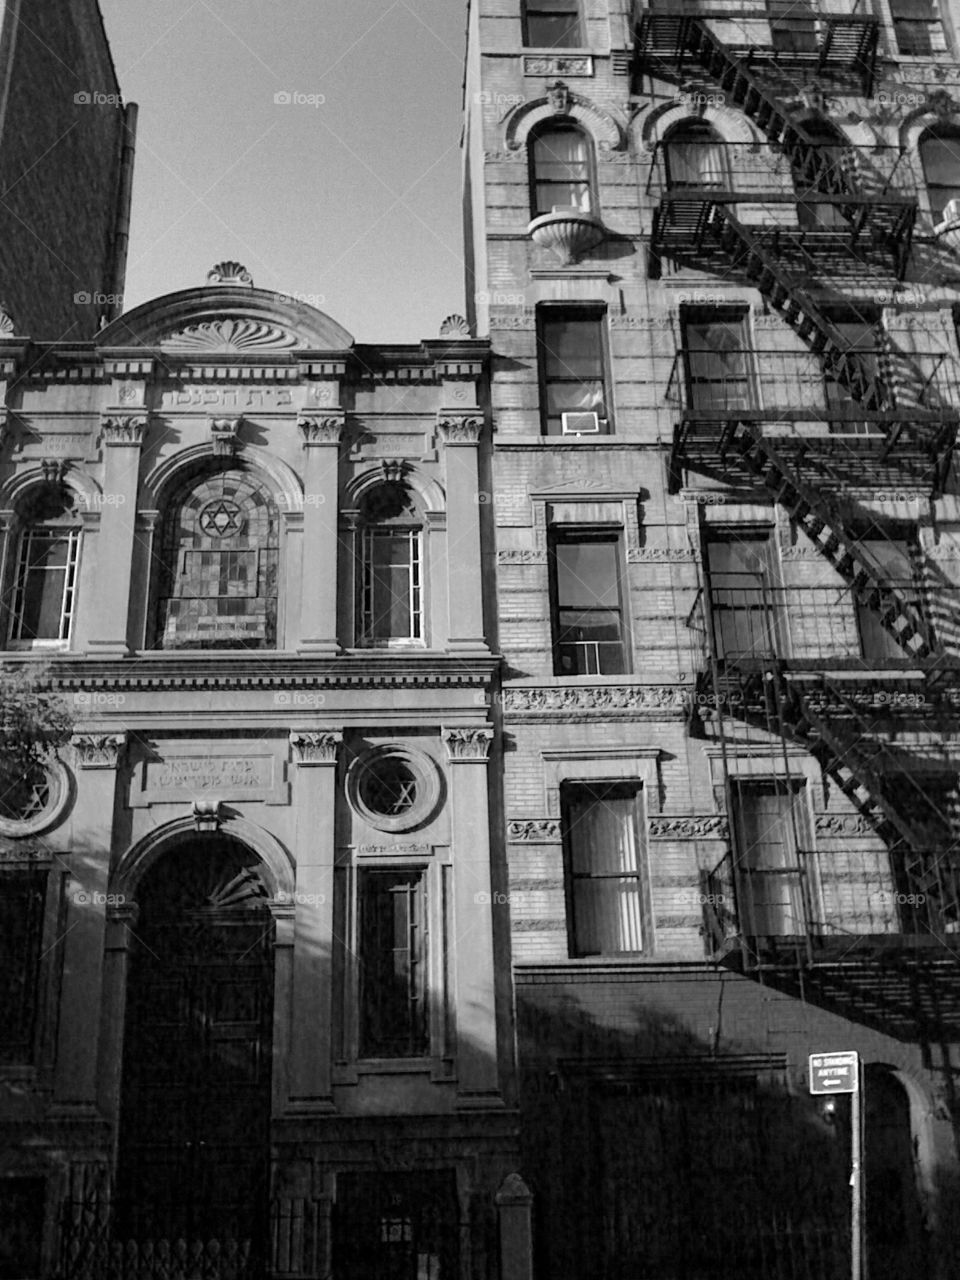 Lower East Side Revery. Synagogue and walk up building on the Lower East Side of Manhattan